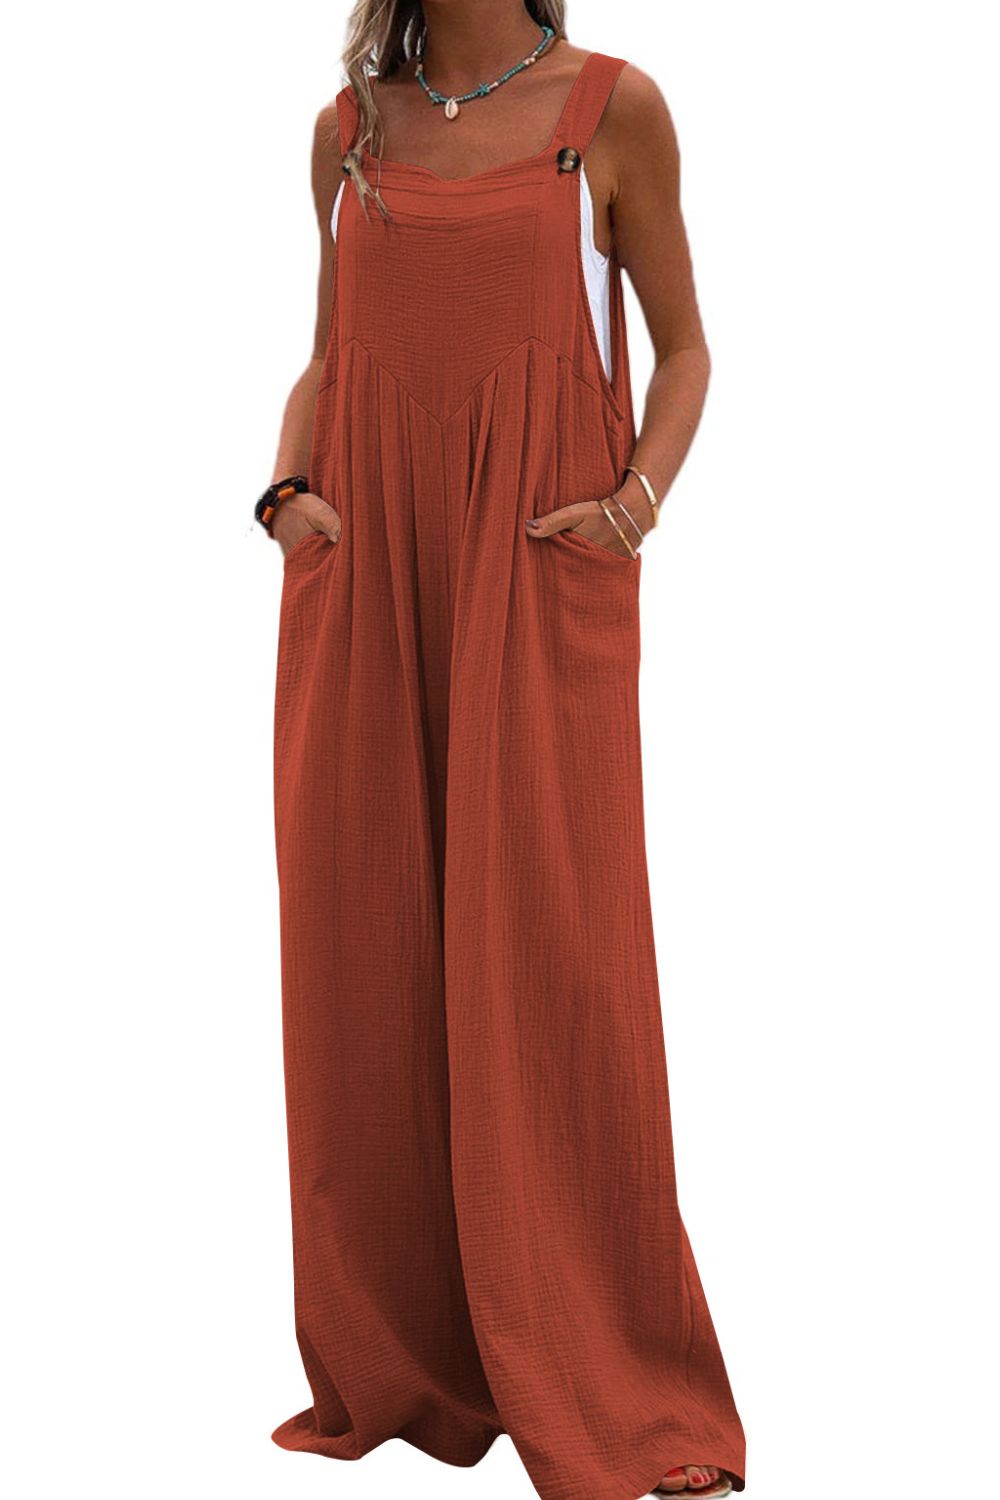 Sleeveless Wide Leg Jumpsuit with Pockets - Coco and lulu boutique 